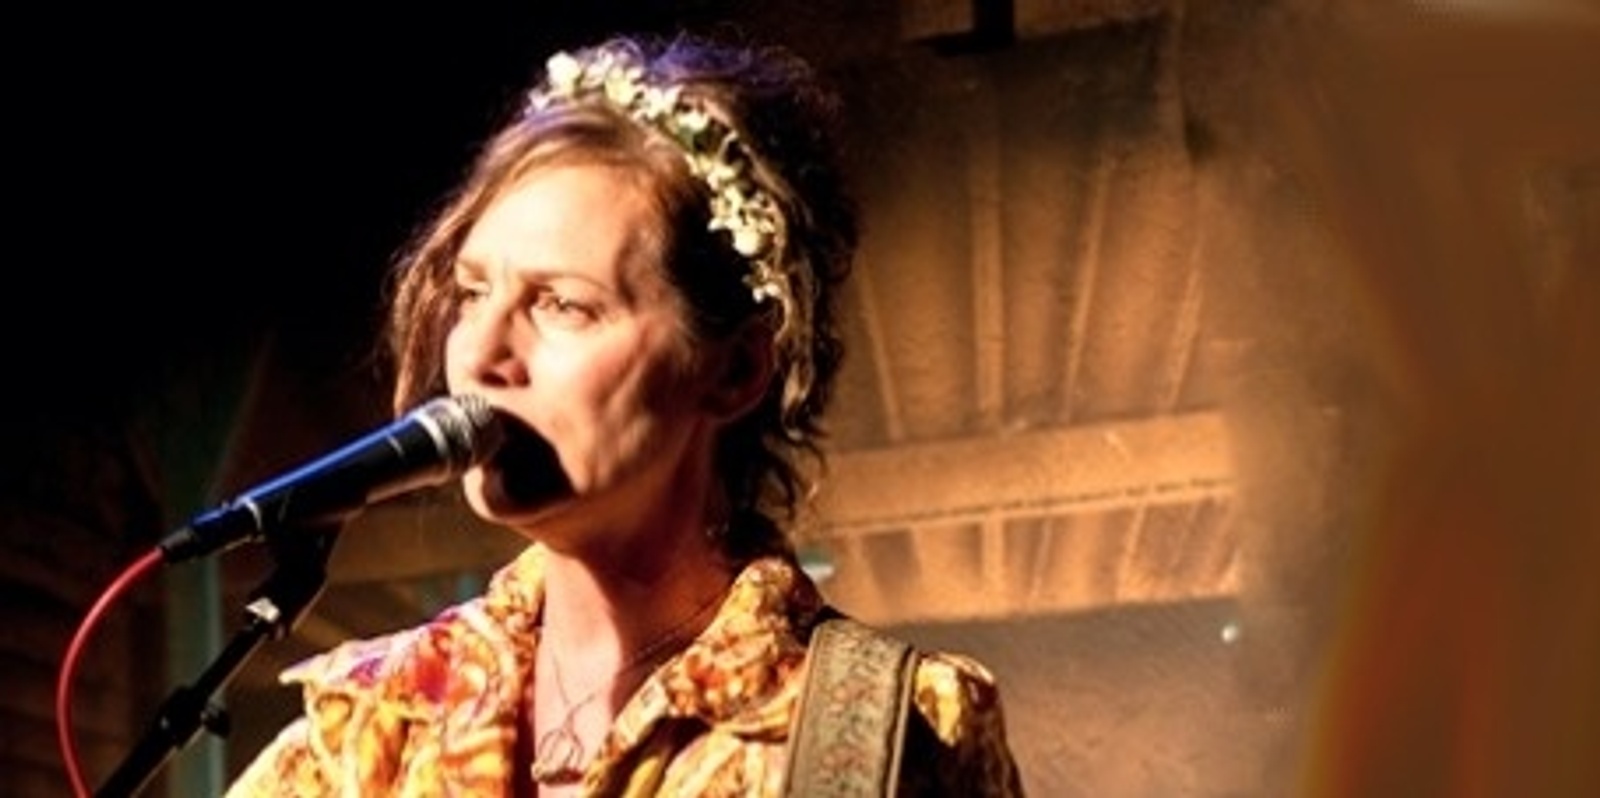 Banner image for Donna Dean with Dodd and Egenes: Butterflies and Bees Tour @ Dunedin Folk Club